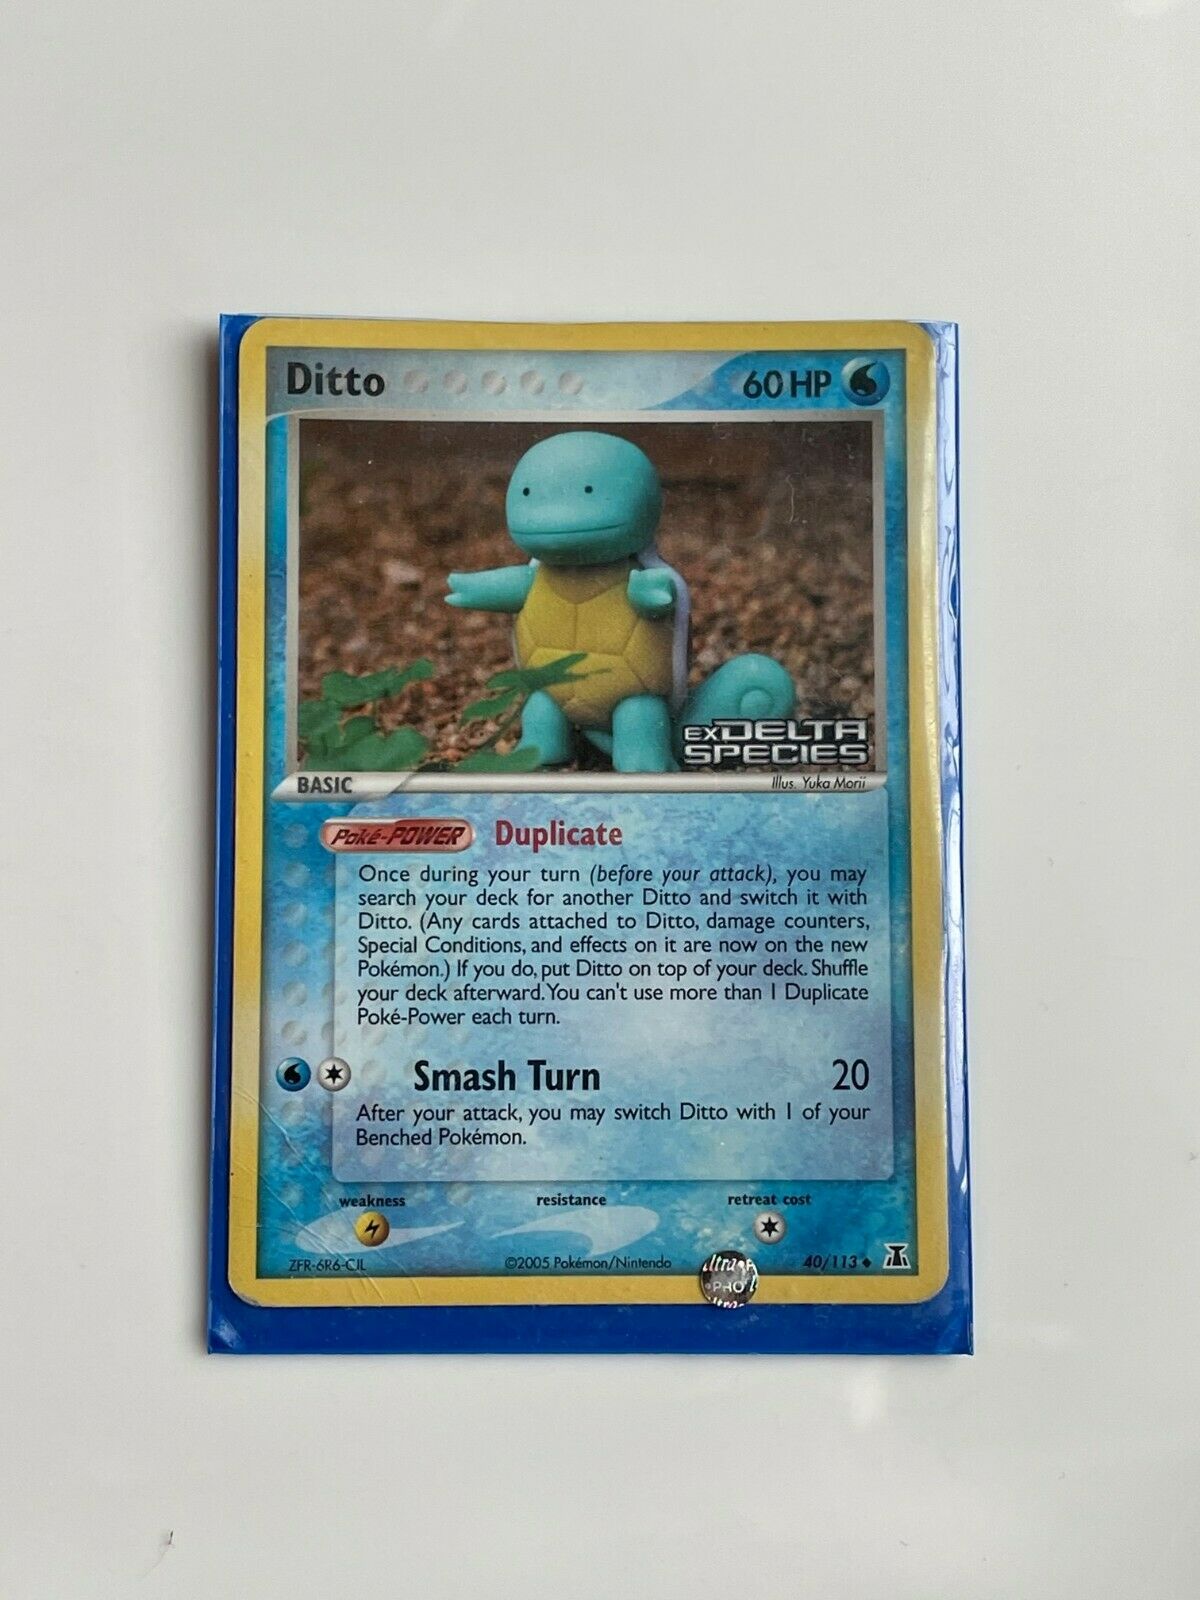 DITTO (SQUIRTLE) - 40/113 - HOLO UNCOMMON EX DELTA SPECIES STAMPED Pokémon Card - Image 1